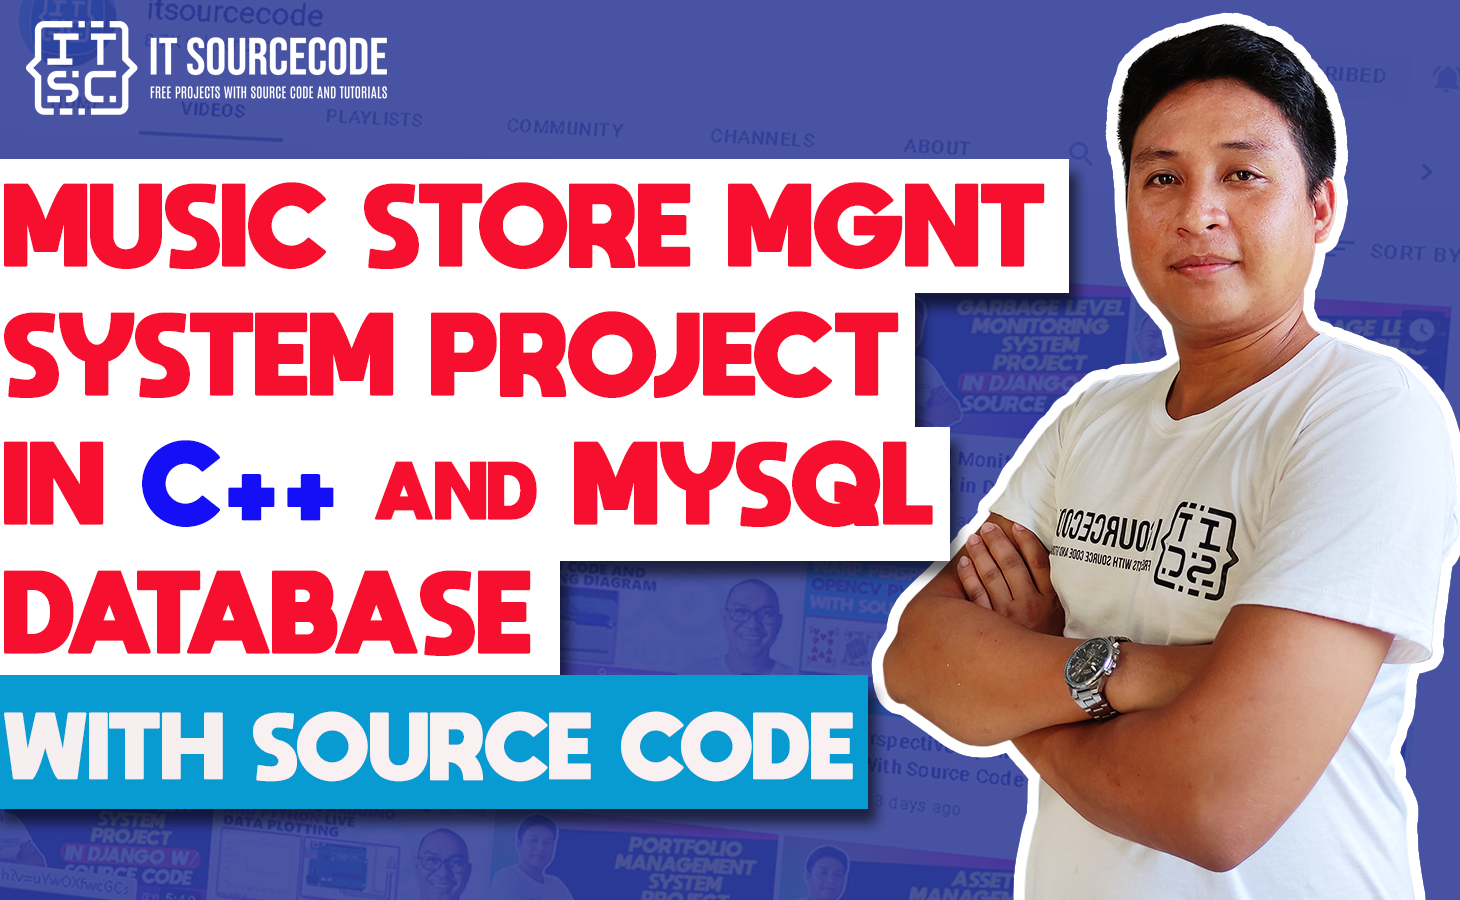 Music Store Management System Project in C++ with MySQL Database